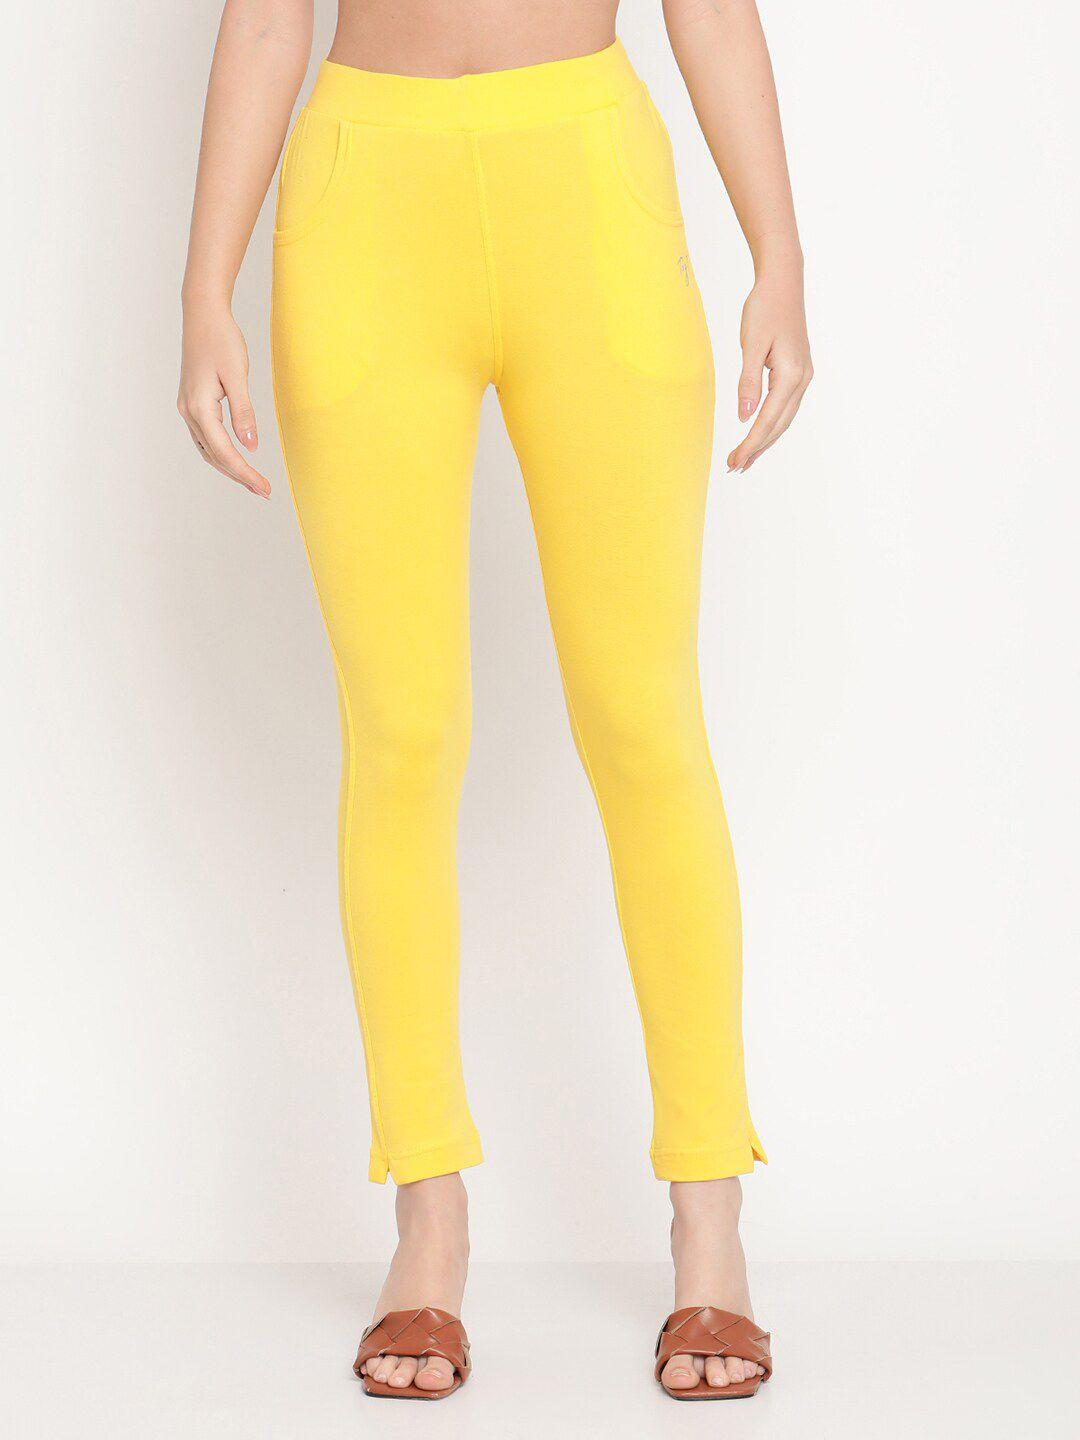 tag 7 women yellow solid jeggings